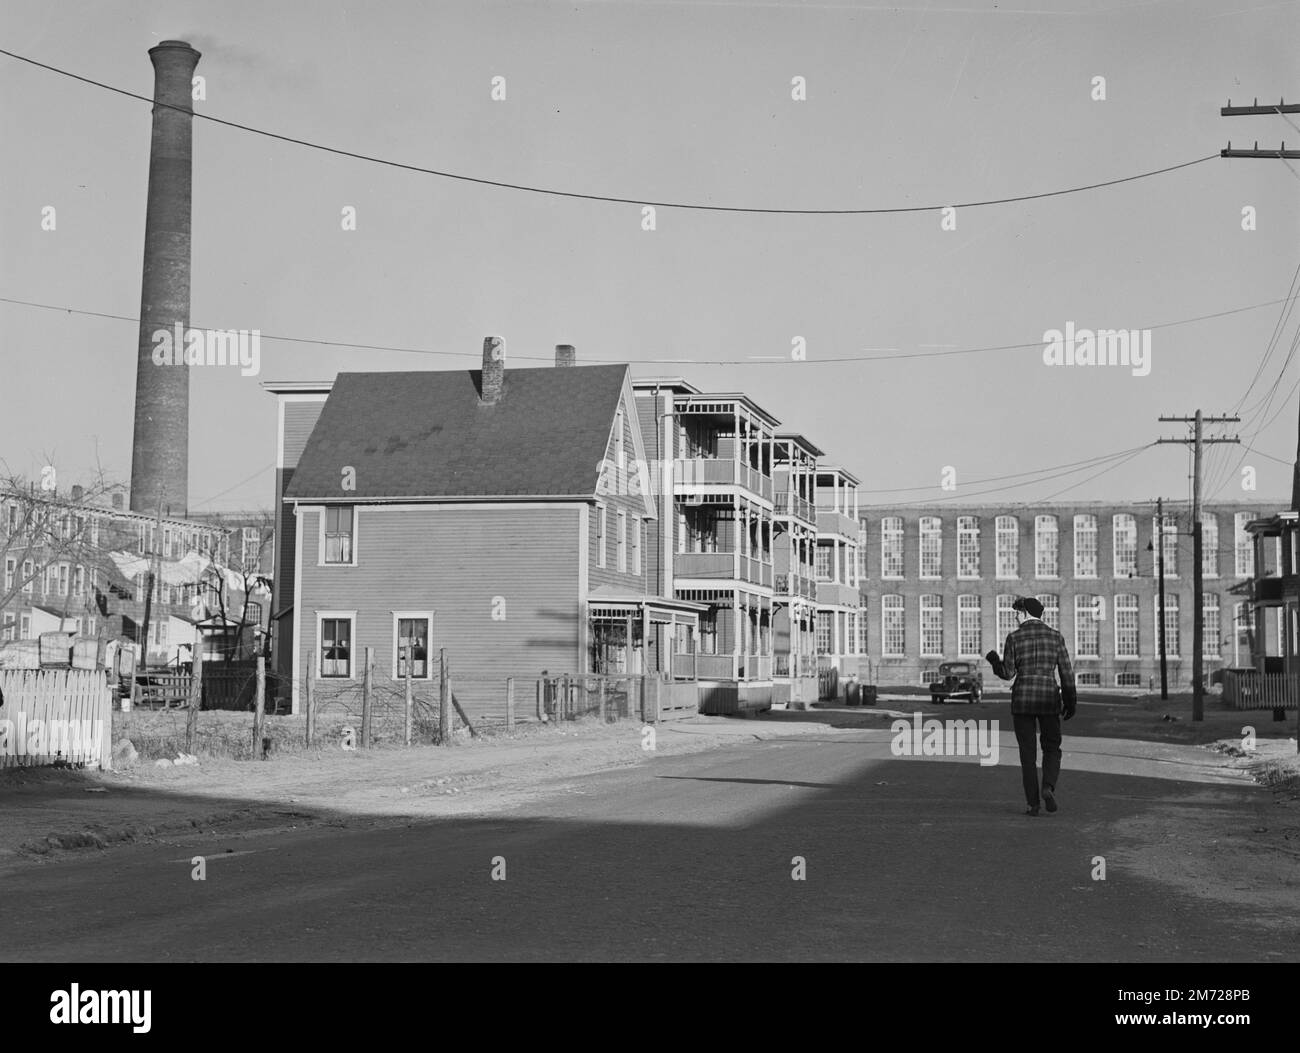 Workers' houses near textile mill in New Bedford, Massachusetts. Bristol County. Delano, Jack, photographer. Circa 1941. (LOC) Stock Photo